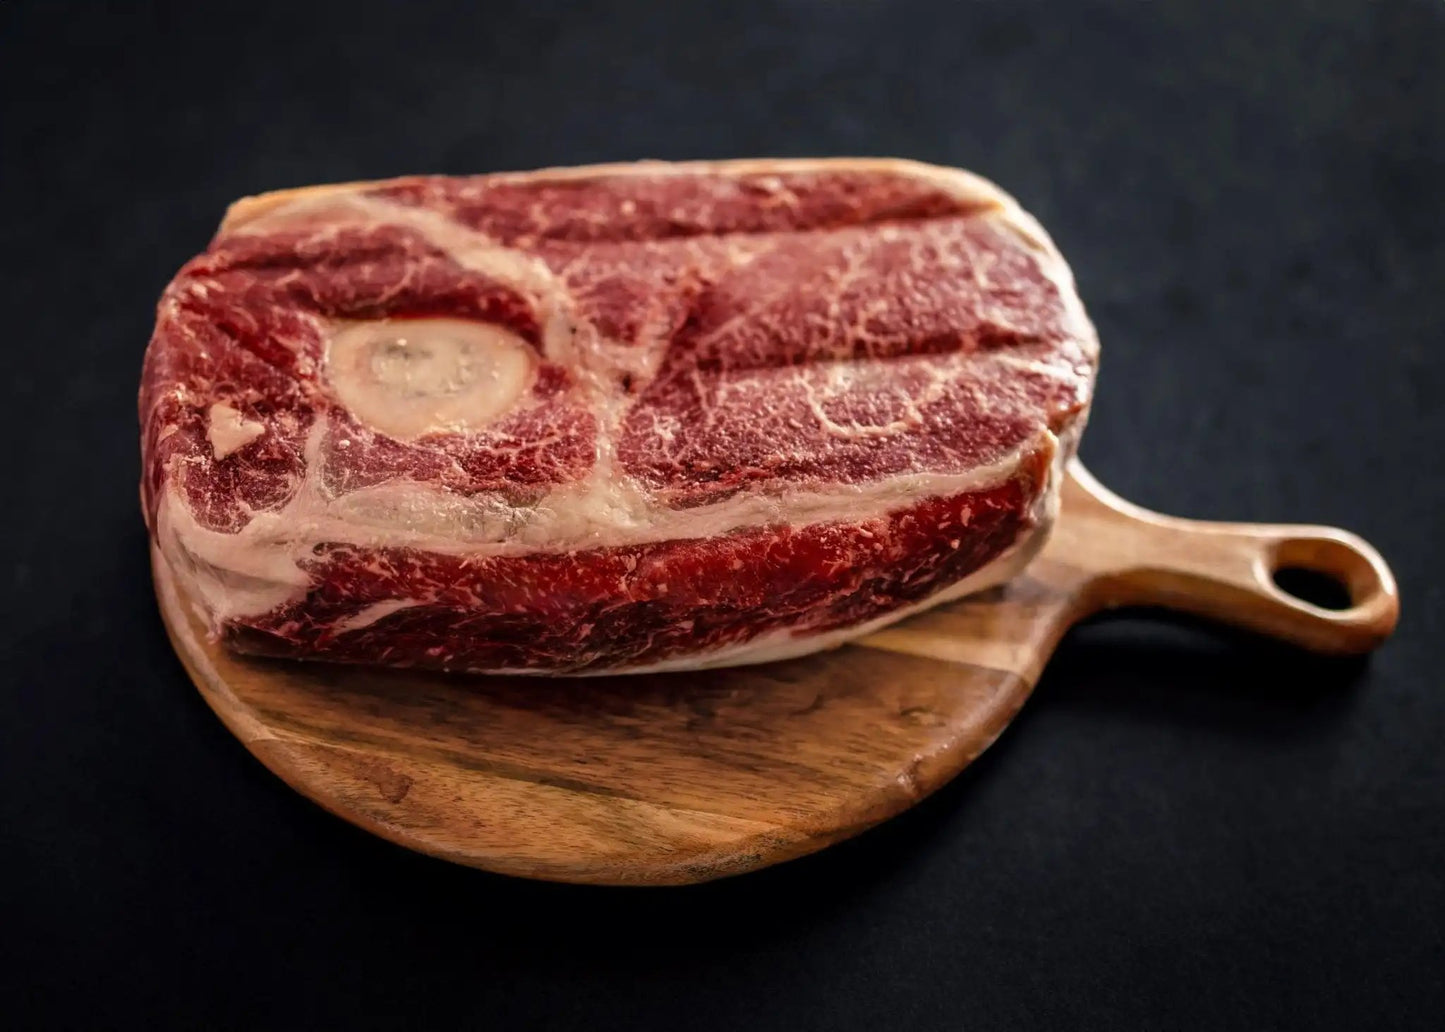 100% All-Natural Grass-Fed Pasture-Raised Wagyu Arm Roast - The Hufeisen-Ranch (WYO Wagyu)